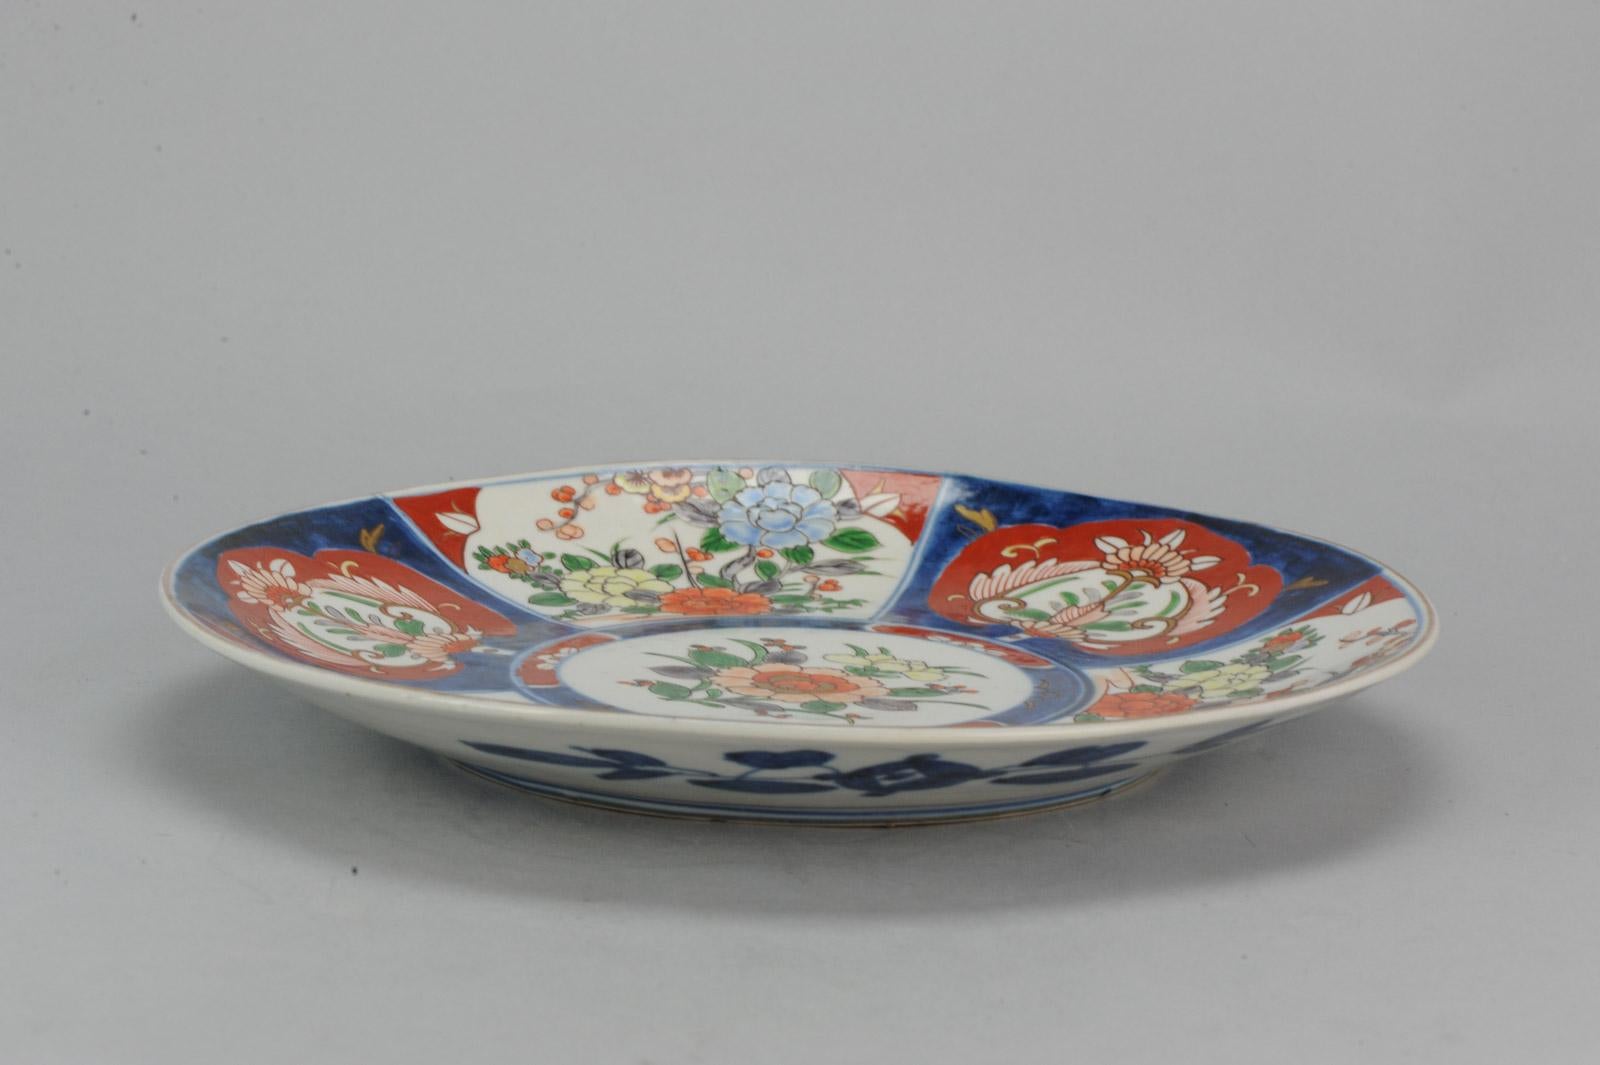 Huge and very nicely painted Japanese Charger with Imari decor. Marked at Base.

Additional information:
Material: Porcelain & Pottery
Type: Chargers (Large Plates), Plates
Region of Origin: Japan
Period: Meiji Periode (1867-1912)
Age: 19th